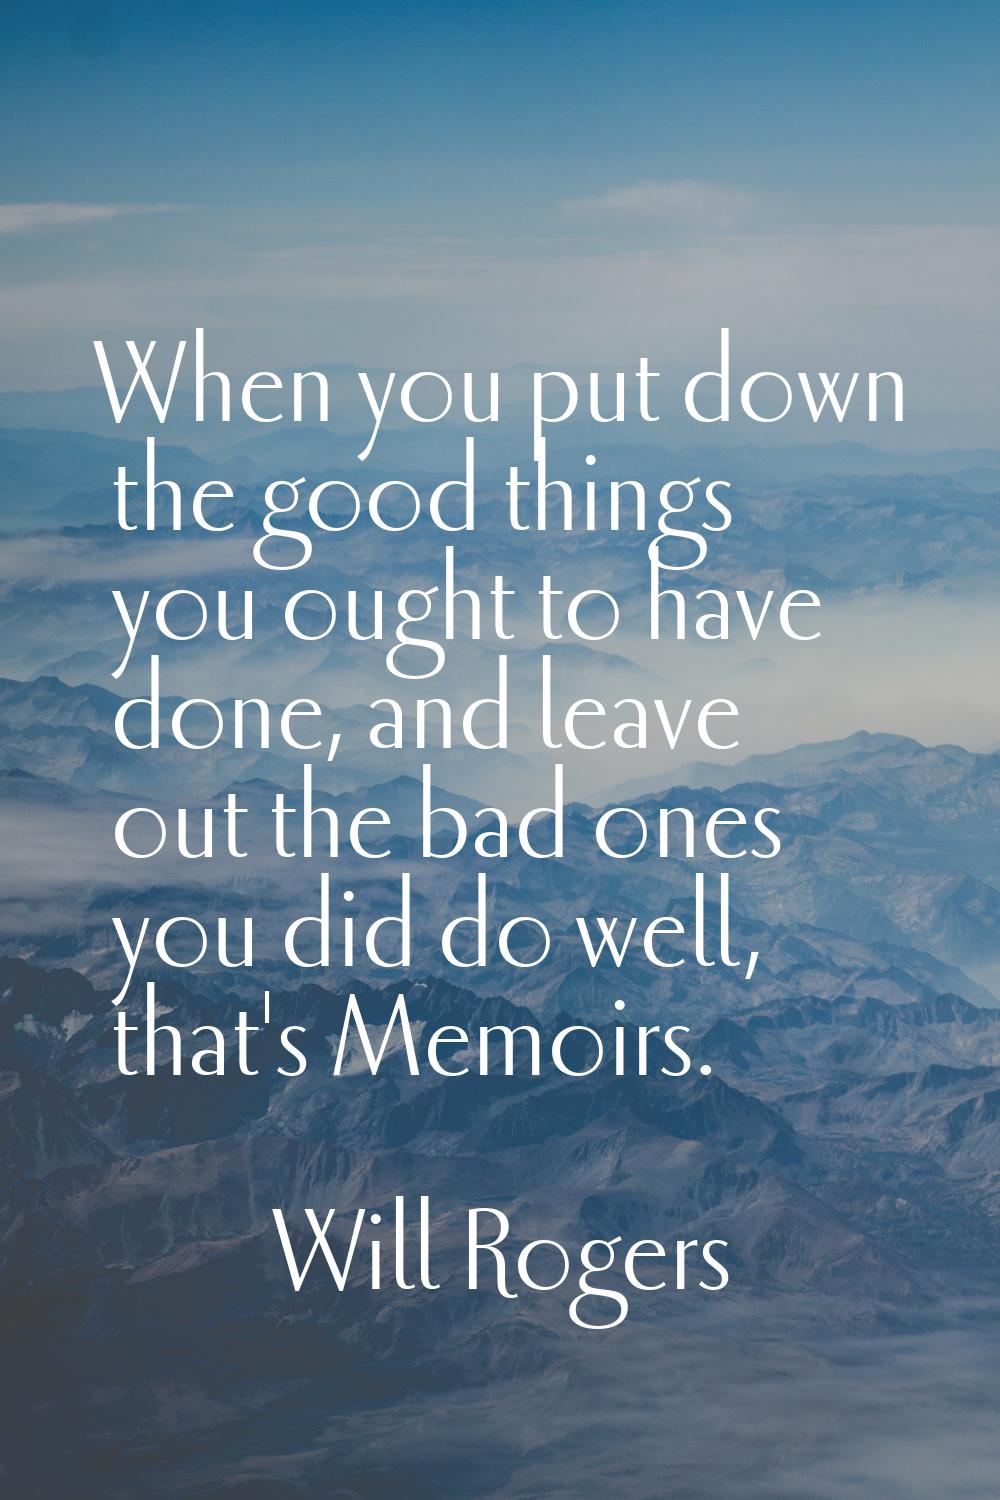 When you put down the good things you ought to have done, and leave out the bad ones you did do wel